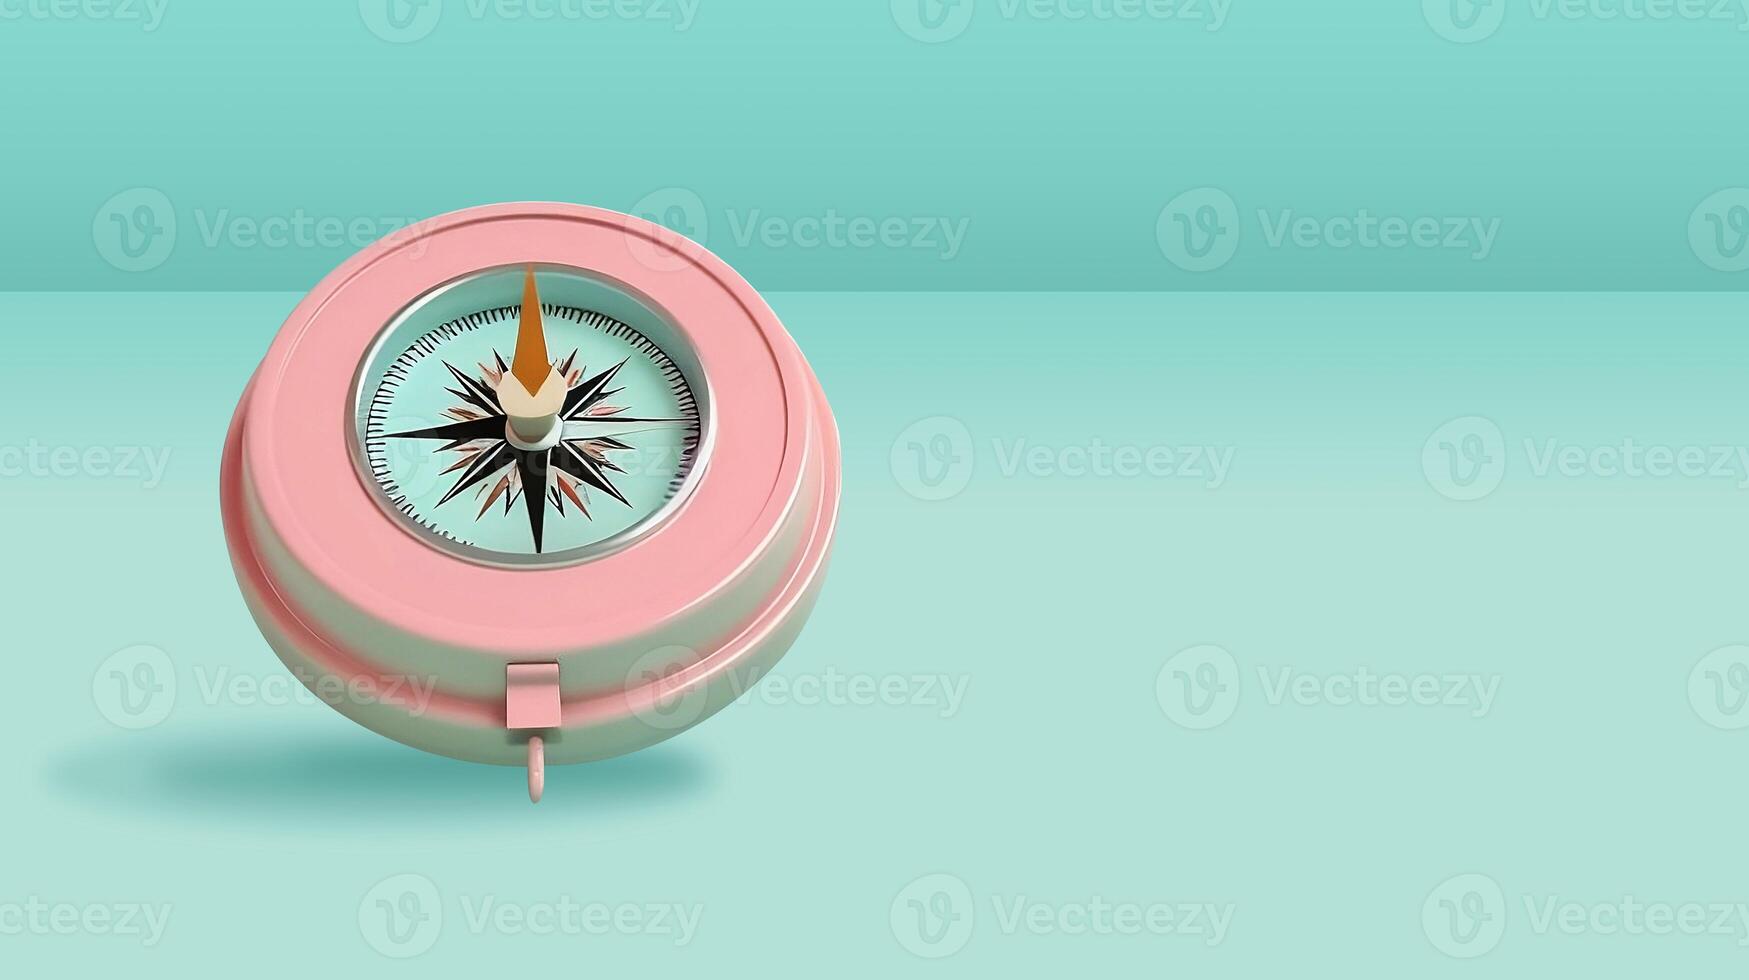 . 3d rendering of a compass in pastel colors on blue background photo